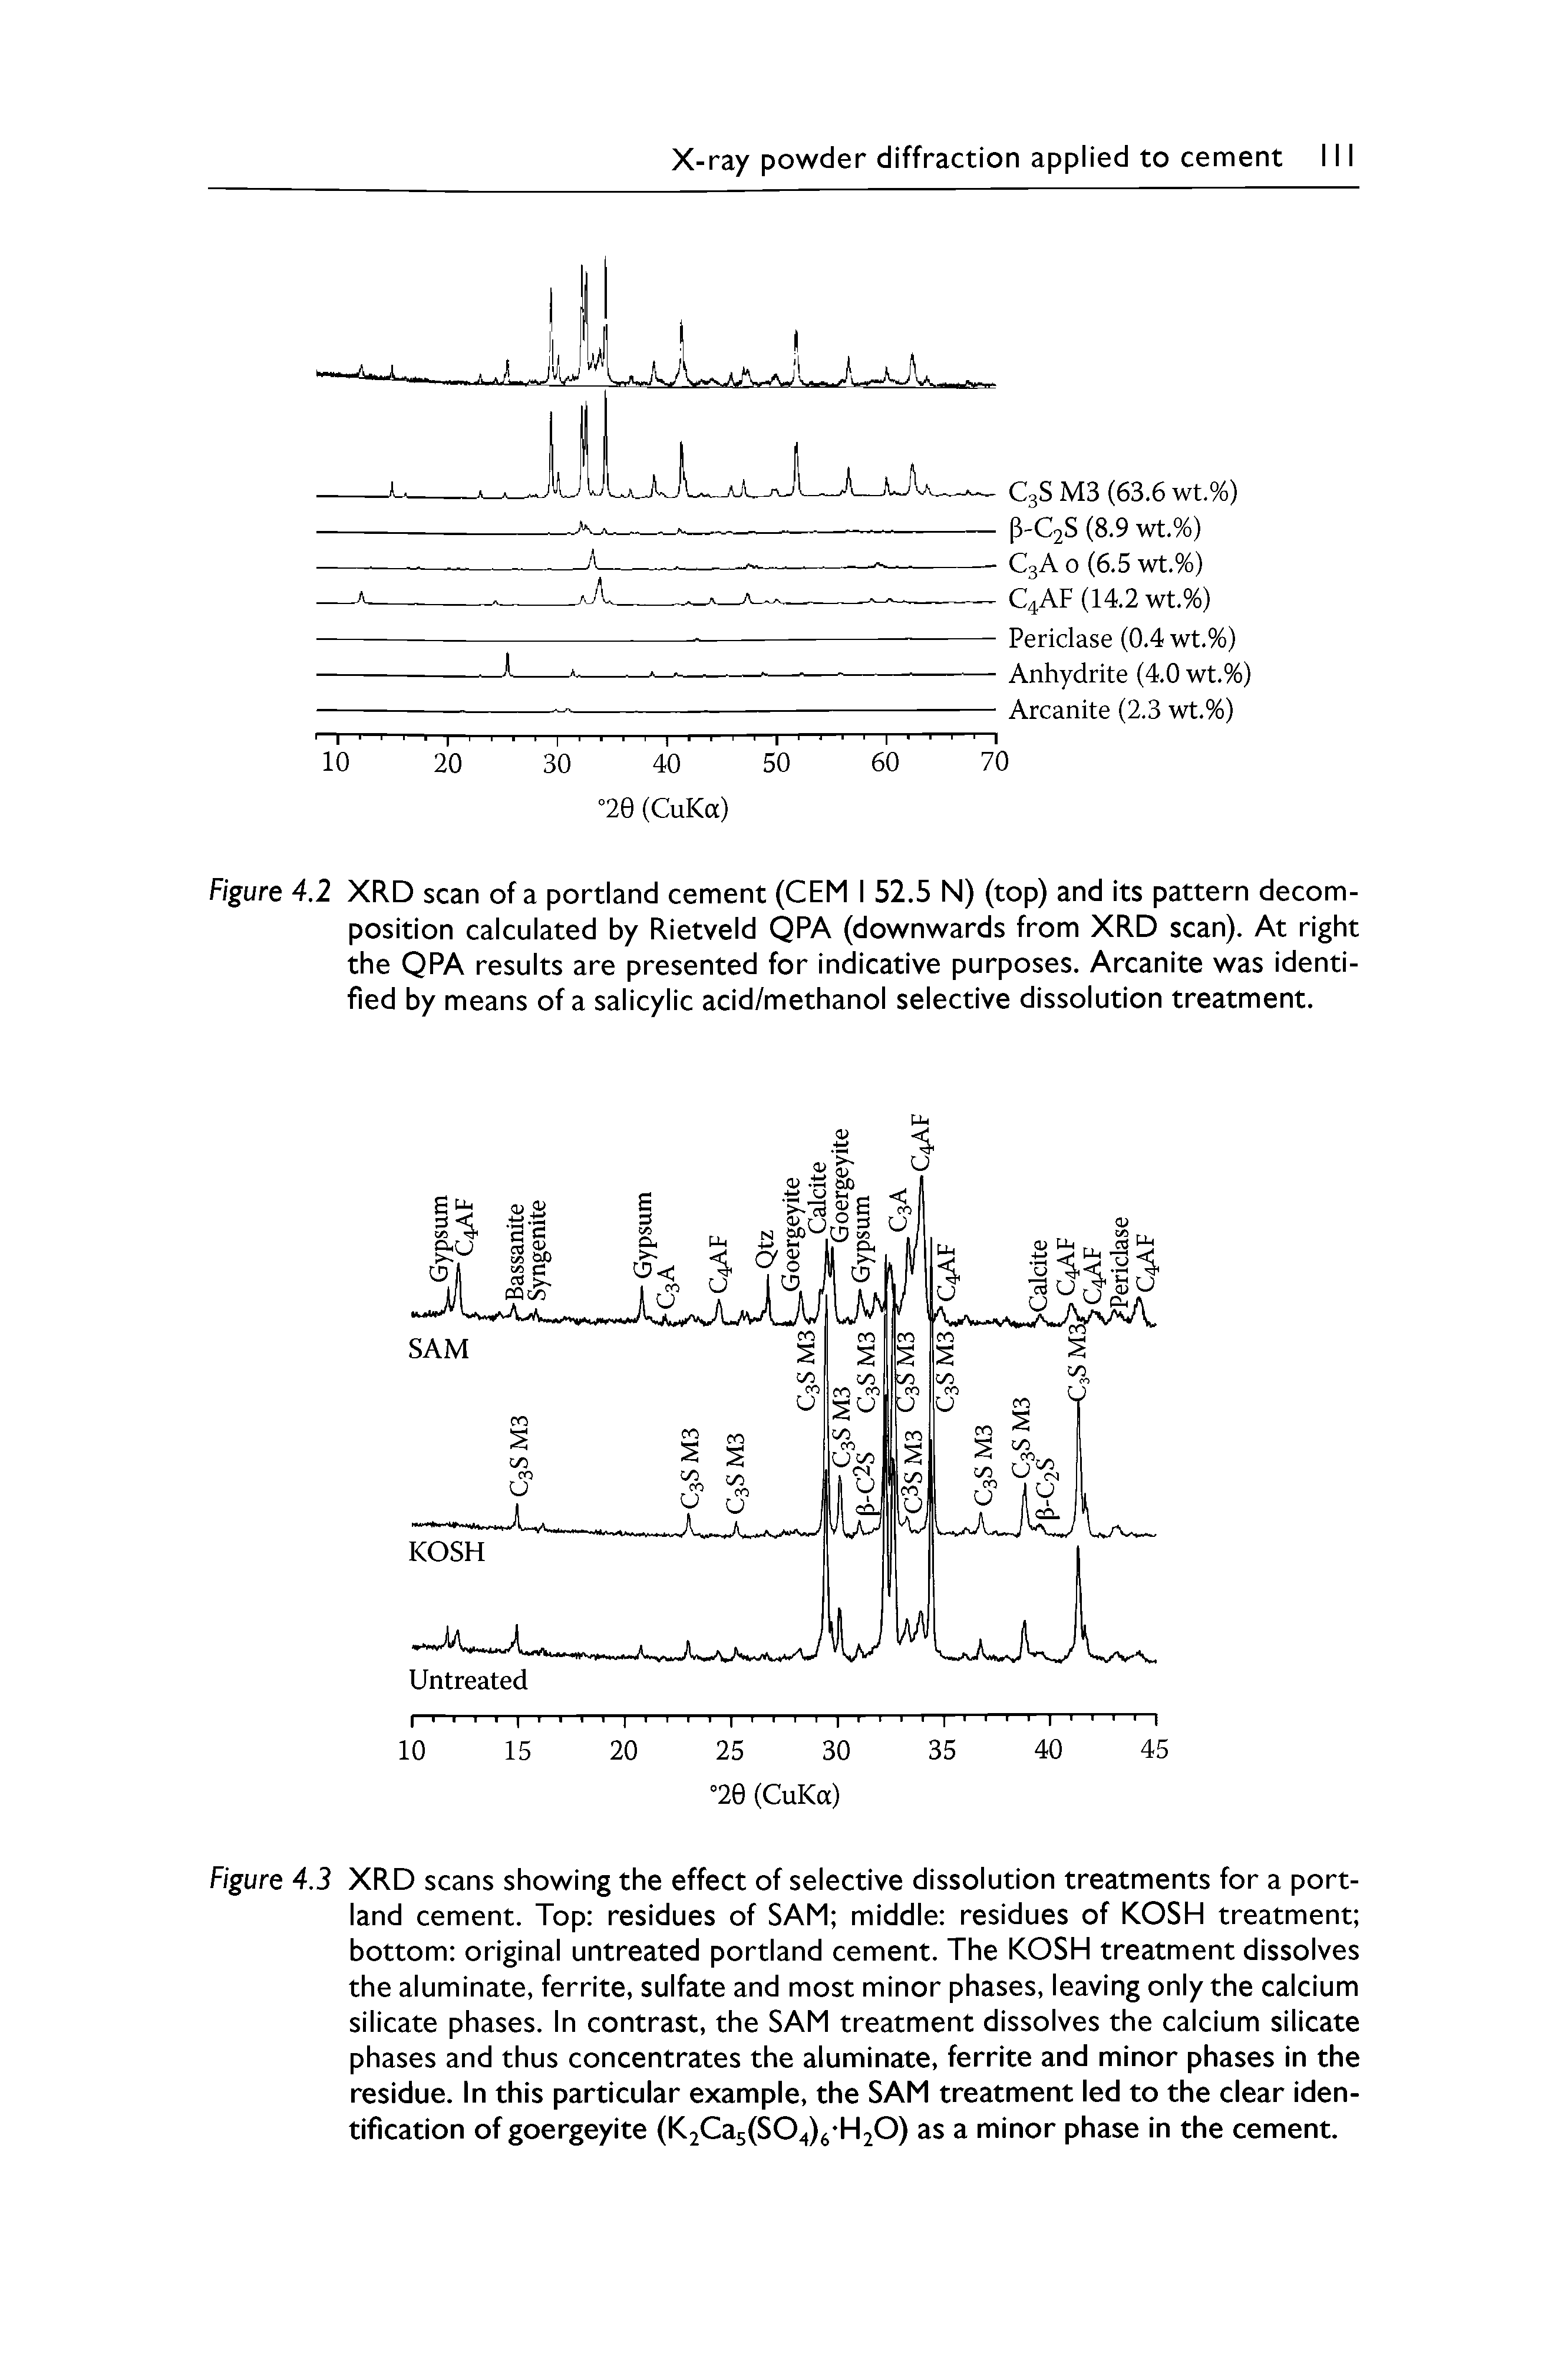 Figure 4.2 XRD scan of a portland cement (CEM I 52.5 N) (top) and its pattern decomposition calculated by Rietveld QPA (downwards from XRD scan). At right the QPA results are presented for indicative purposes. Arcanite was identified by means of a salicylic acid/methanol selective dissolution treatment.